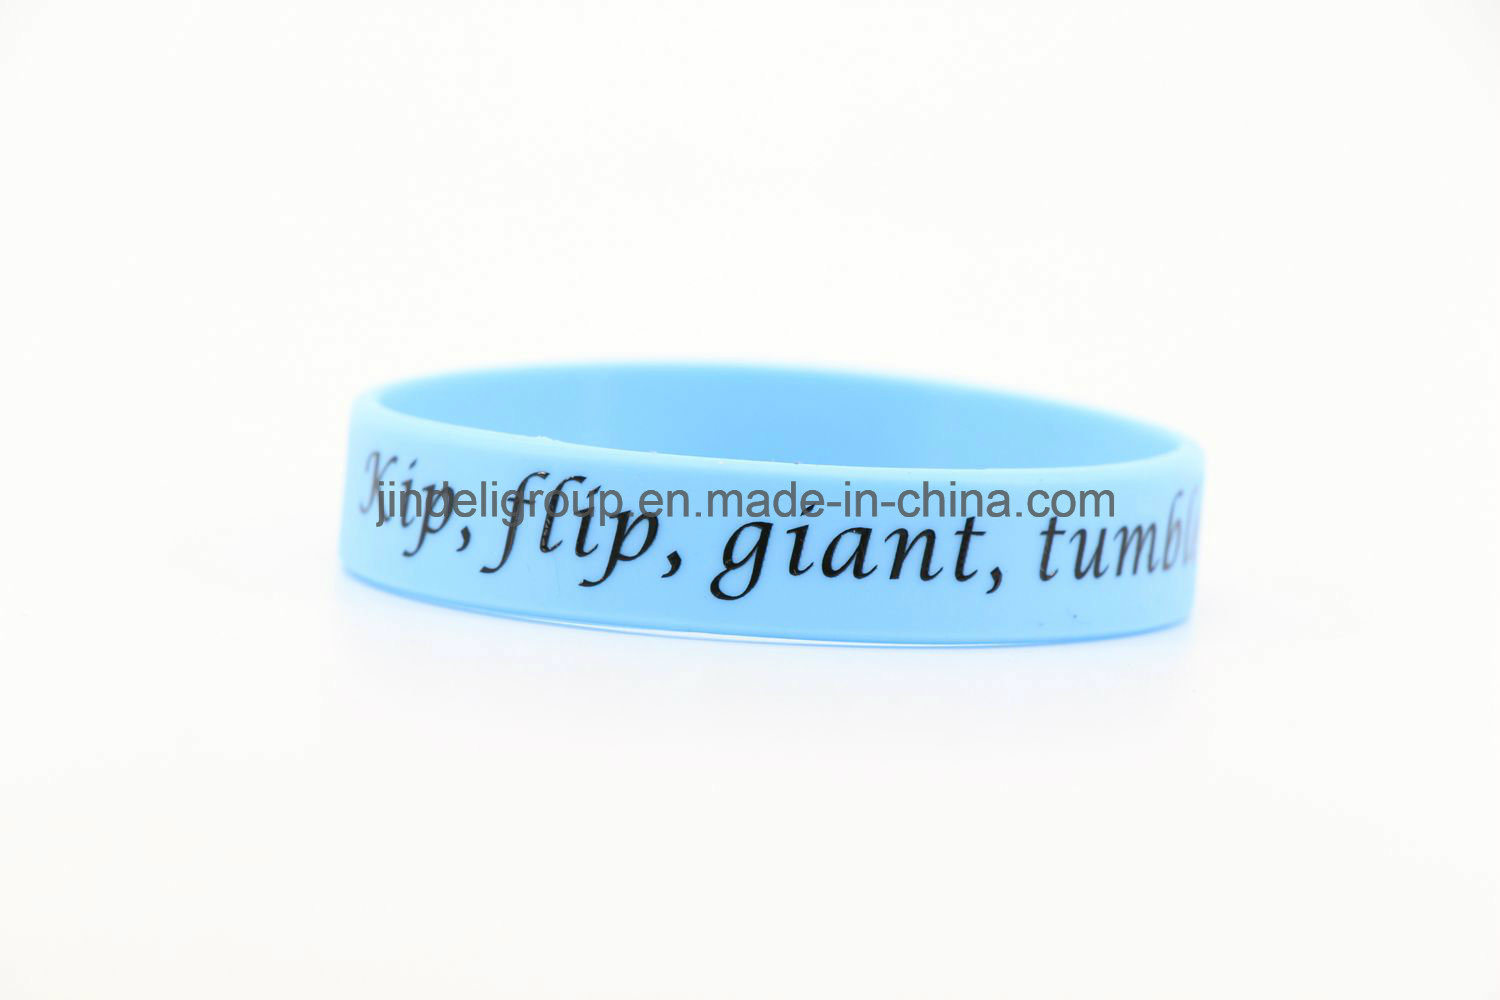 Personalized Blue Debossed Bracelet Filled with White Text Rubber Bracelet